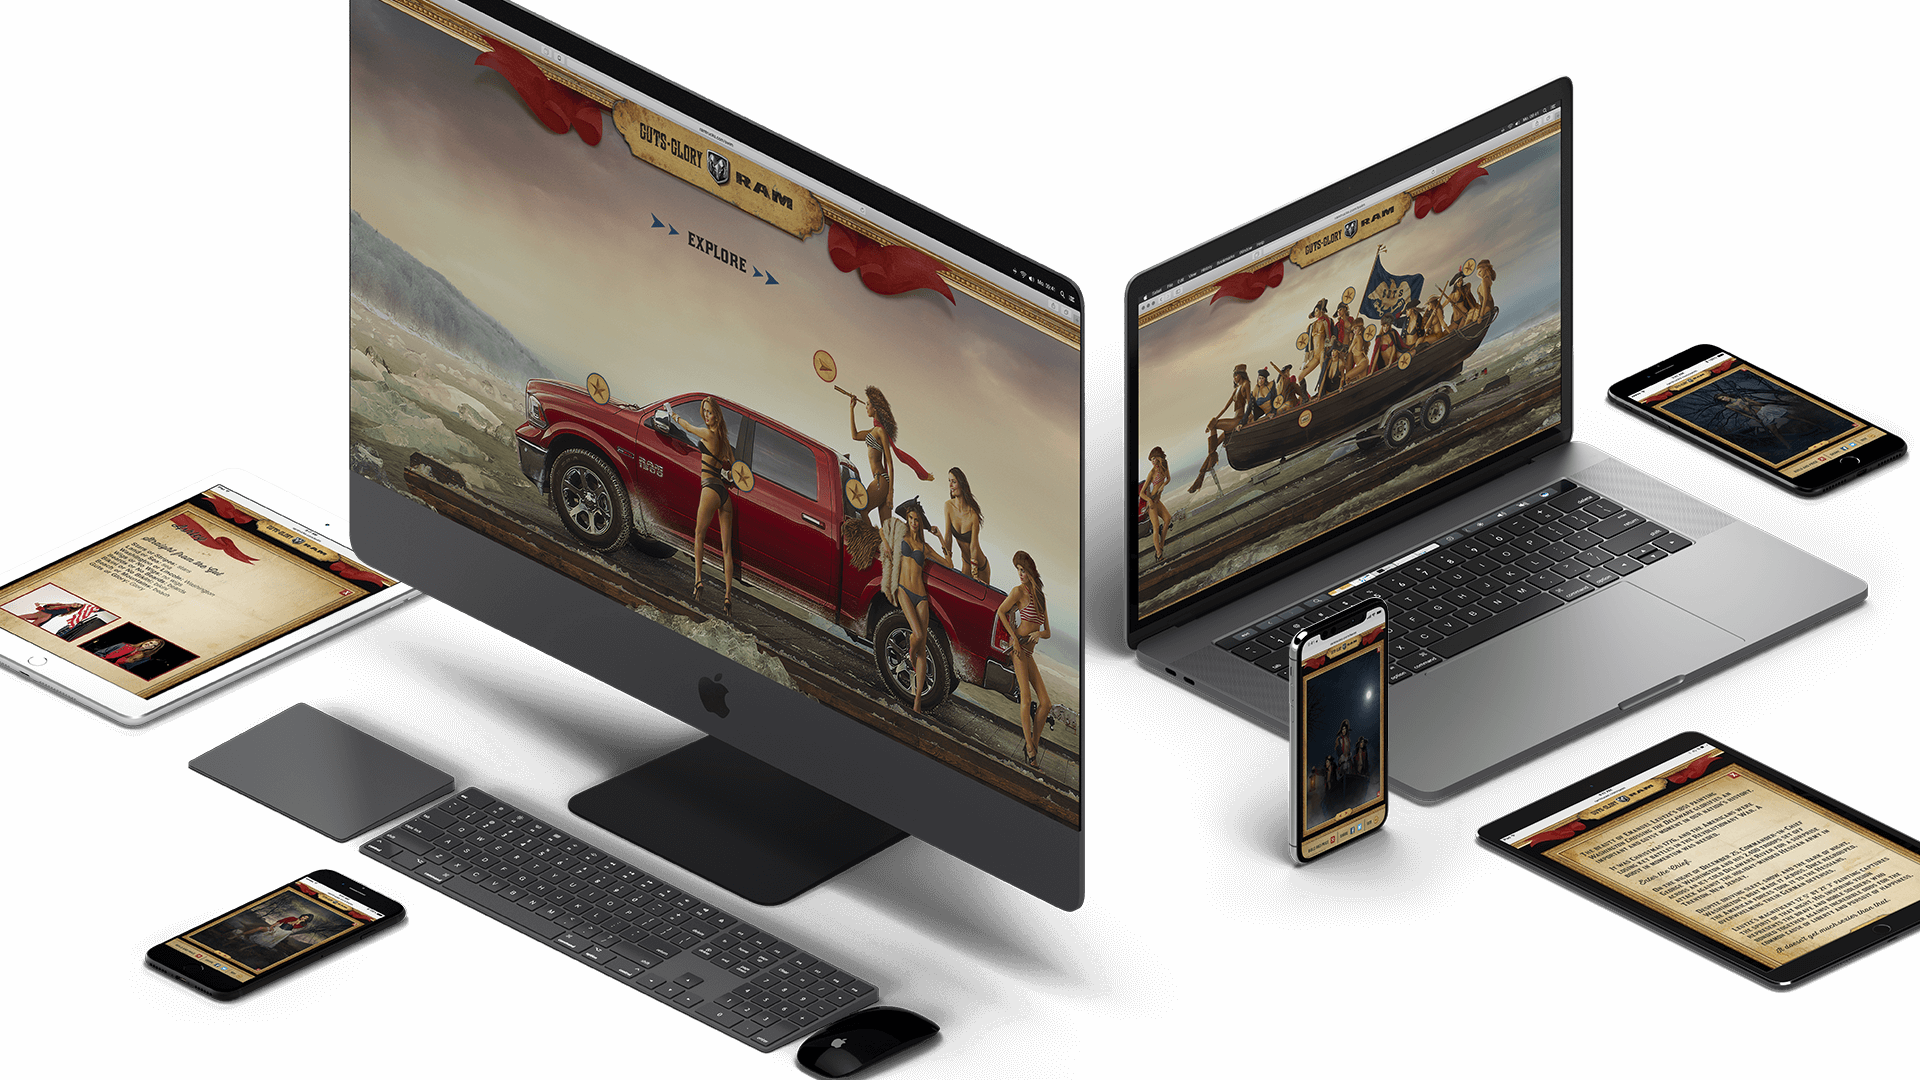 Ram campaign on mobile and desktop screens